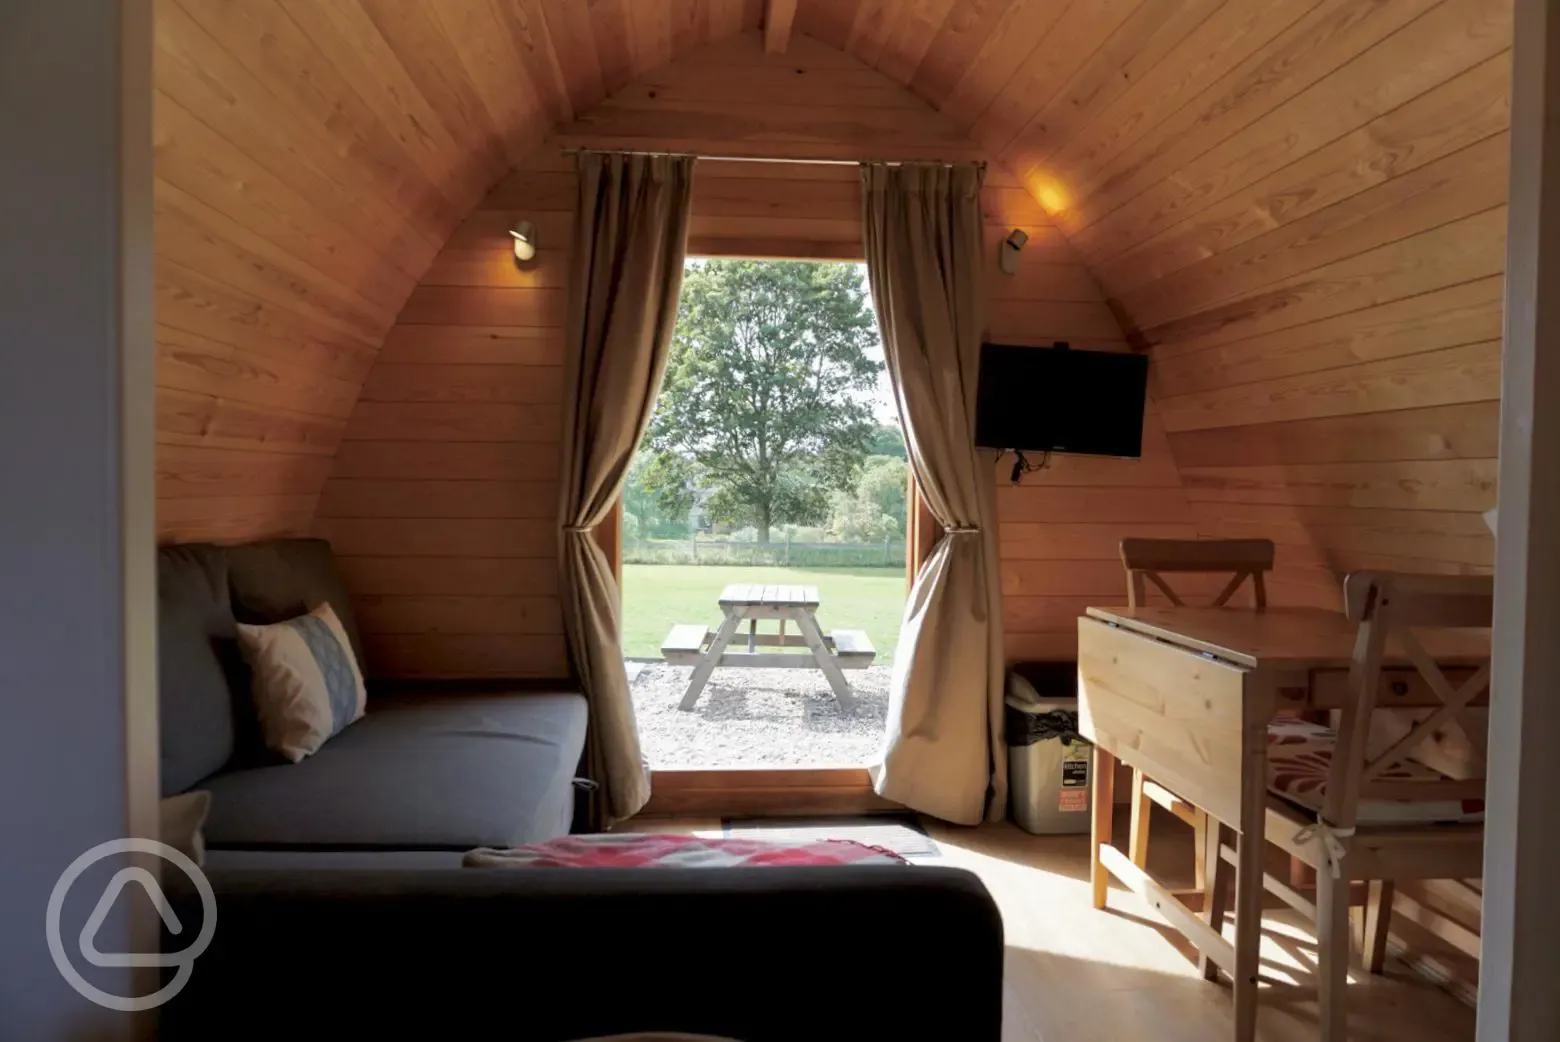 View from inside the glamping pods